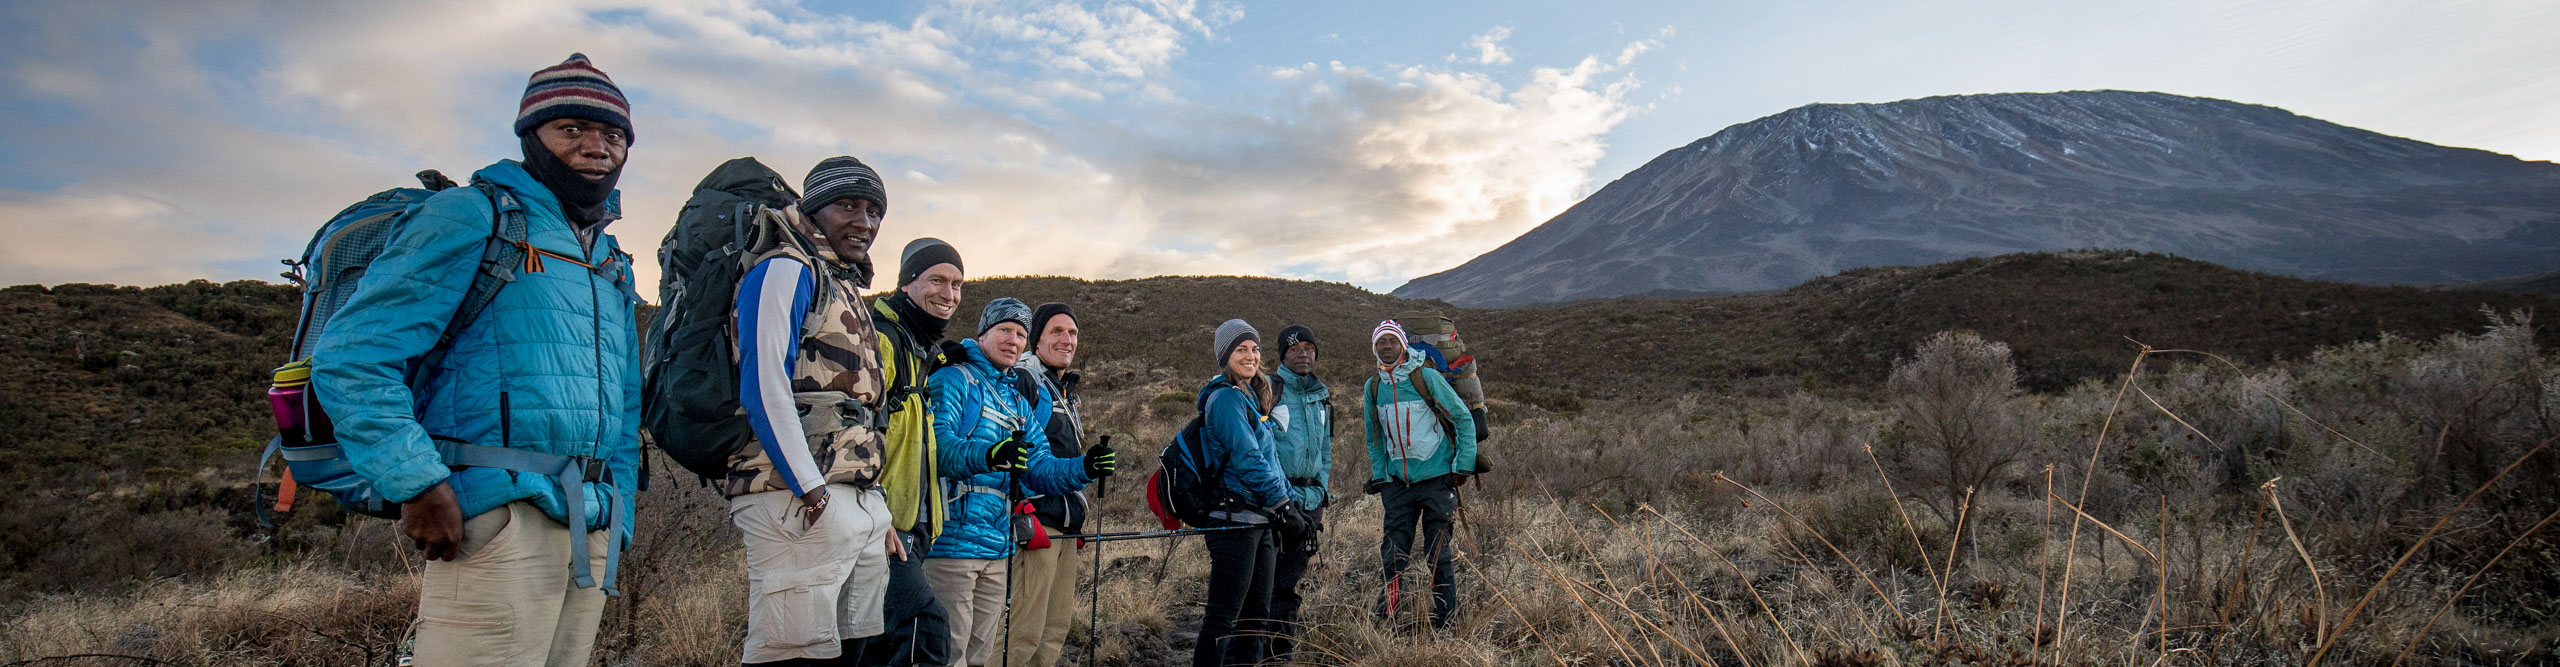 Hikers getting ready to climb Mount Kilimanjaro on a sunny day 